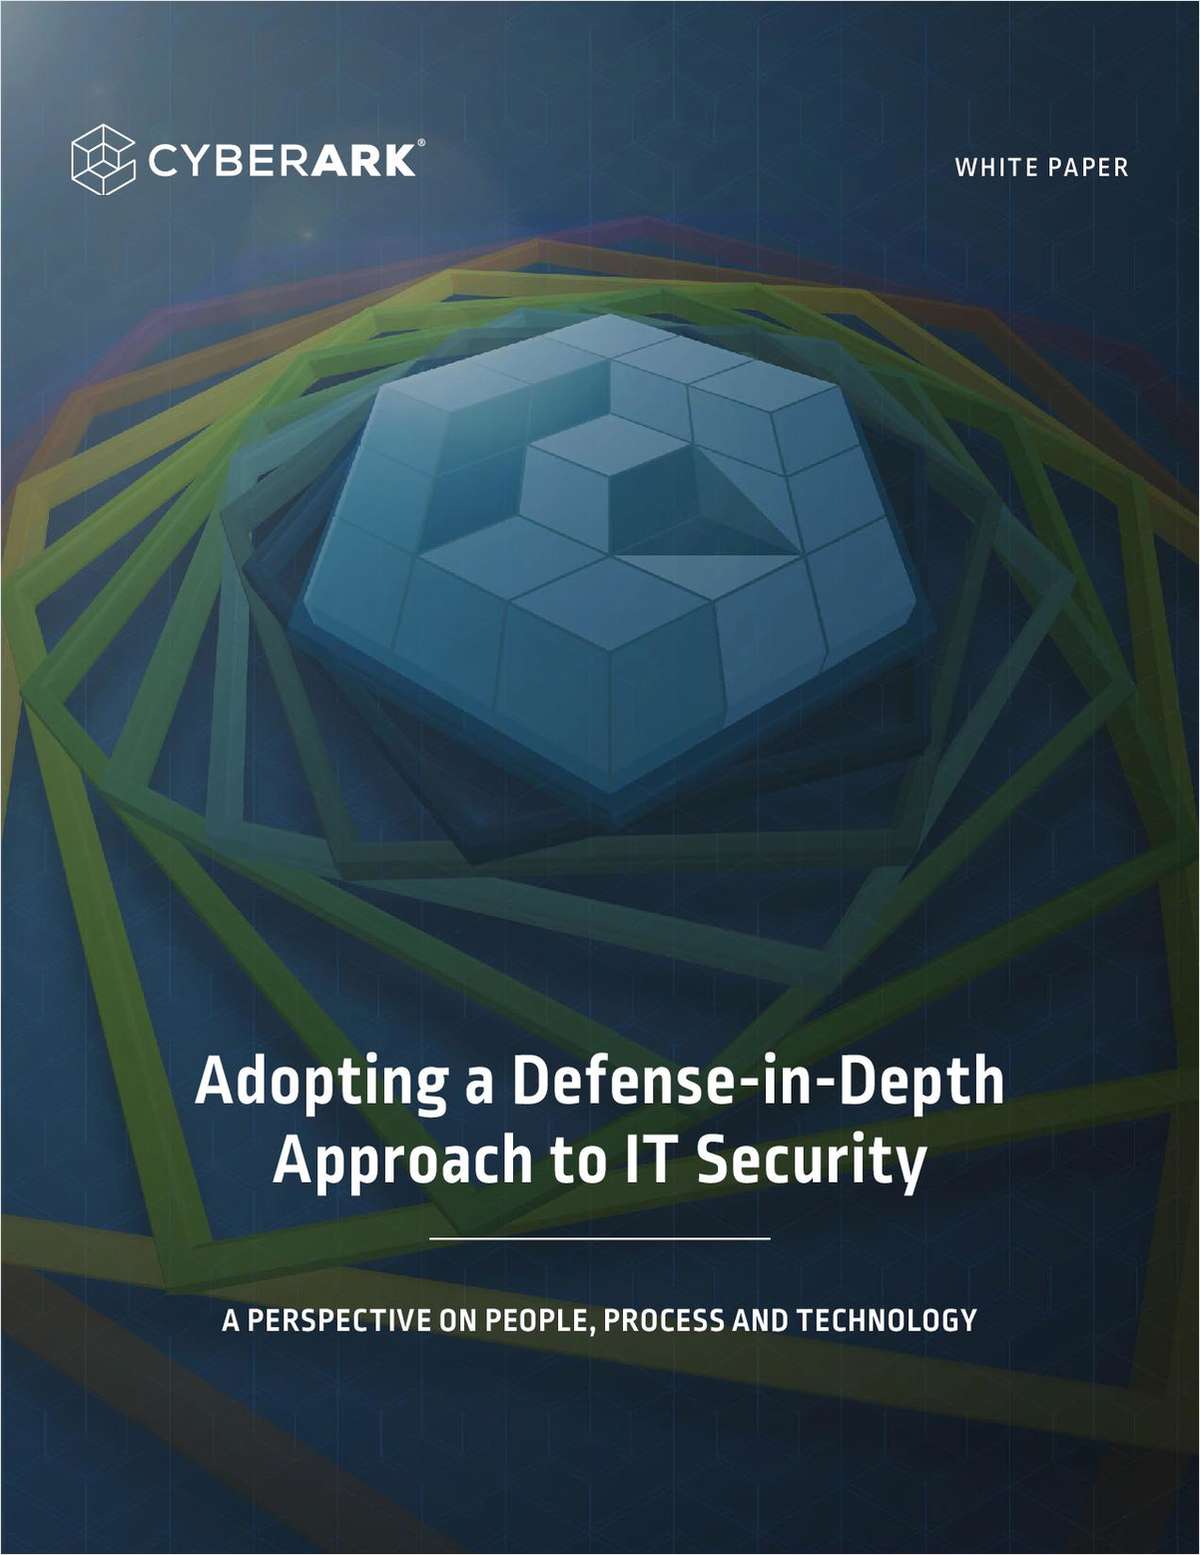 Adopting a Defense-in-Depth Approach to IT Security